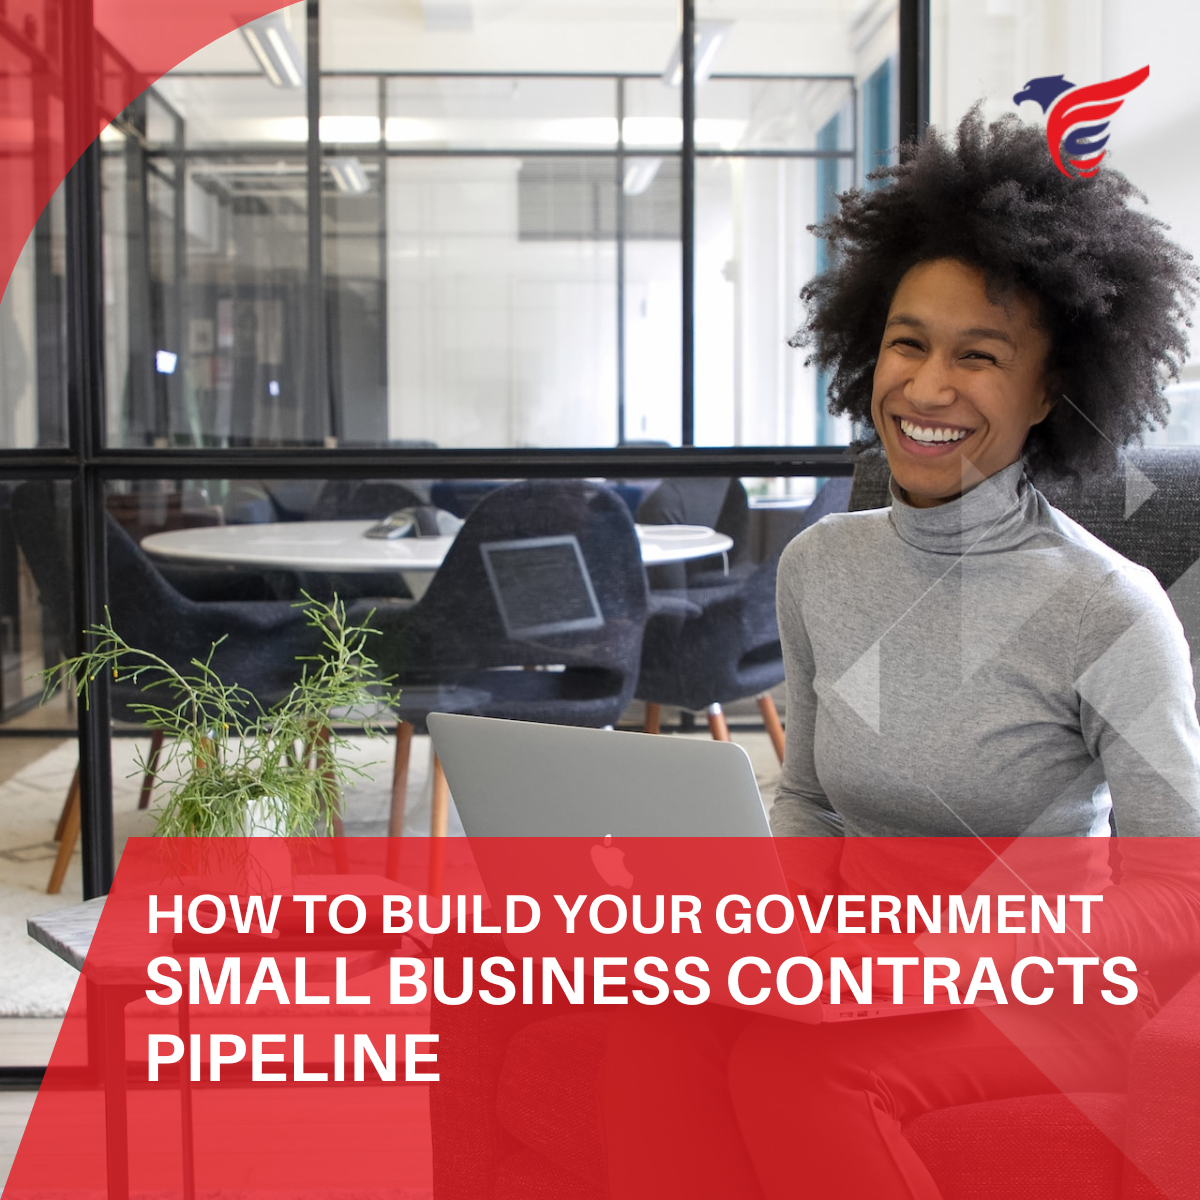 How to Build Your Government Small Business Contracts Pipeline